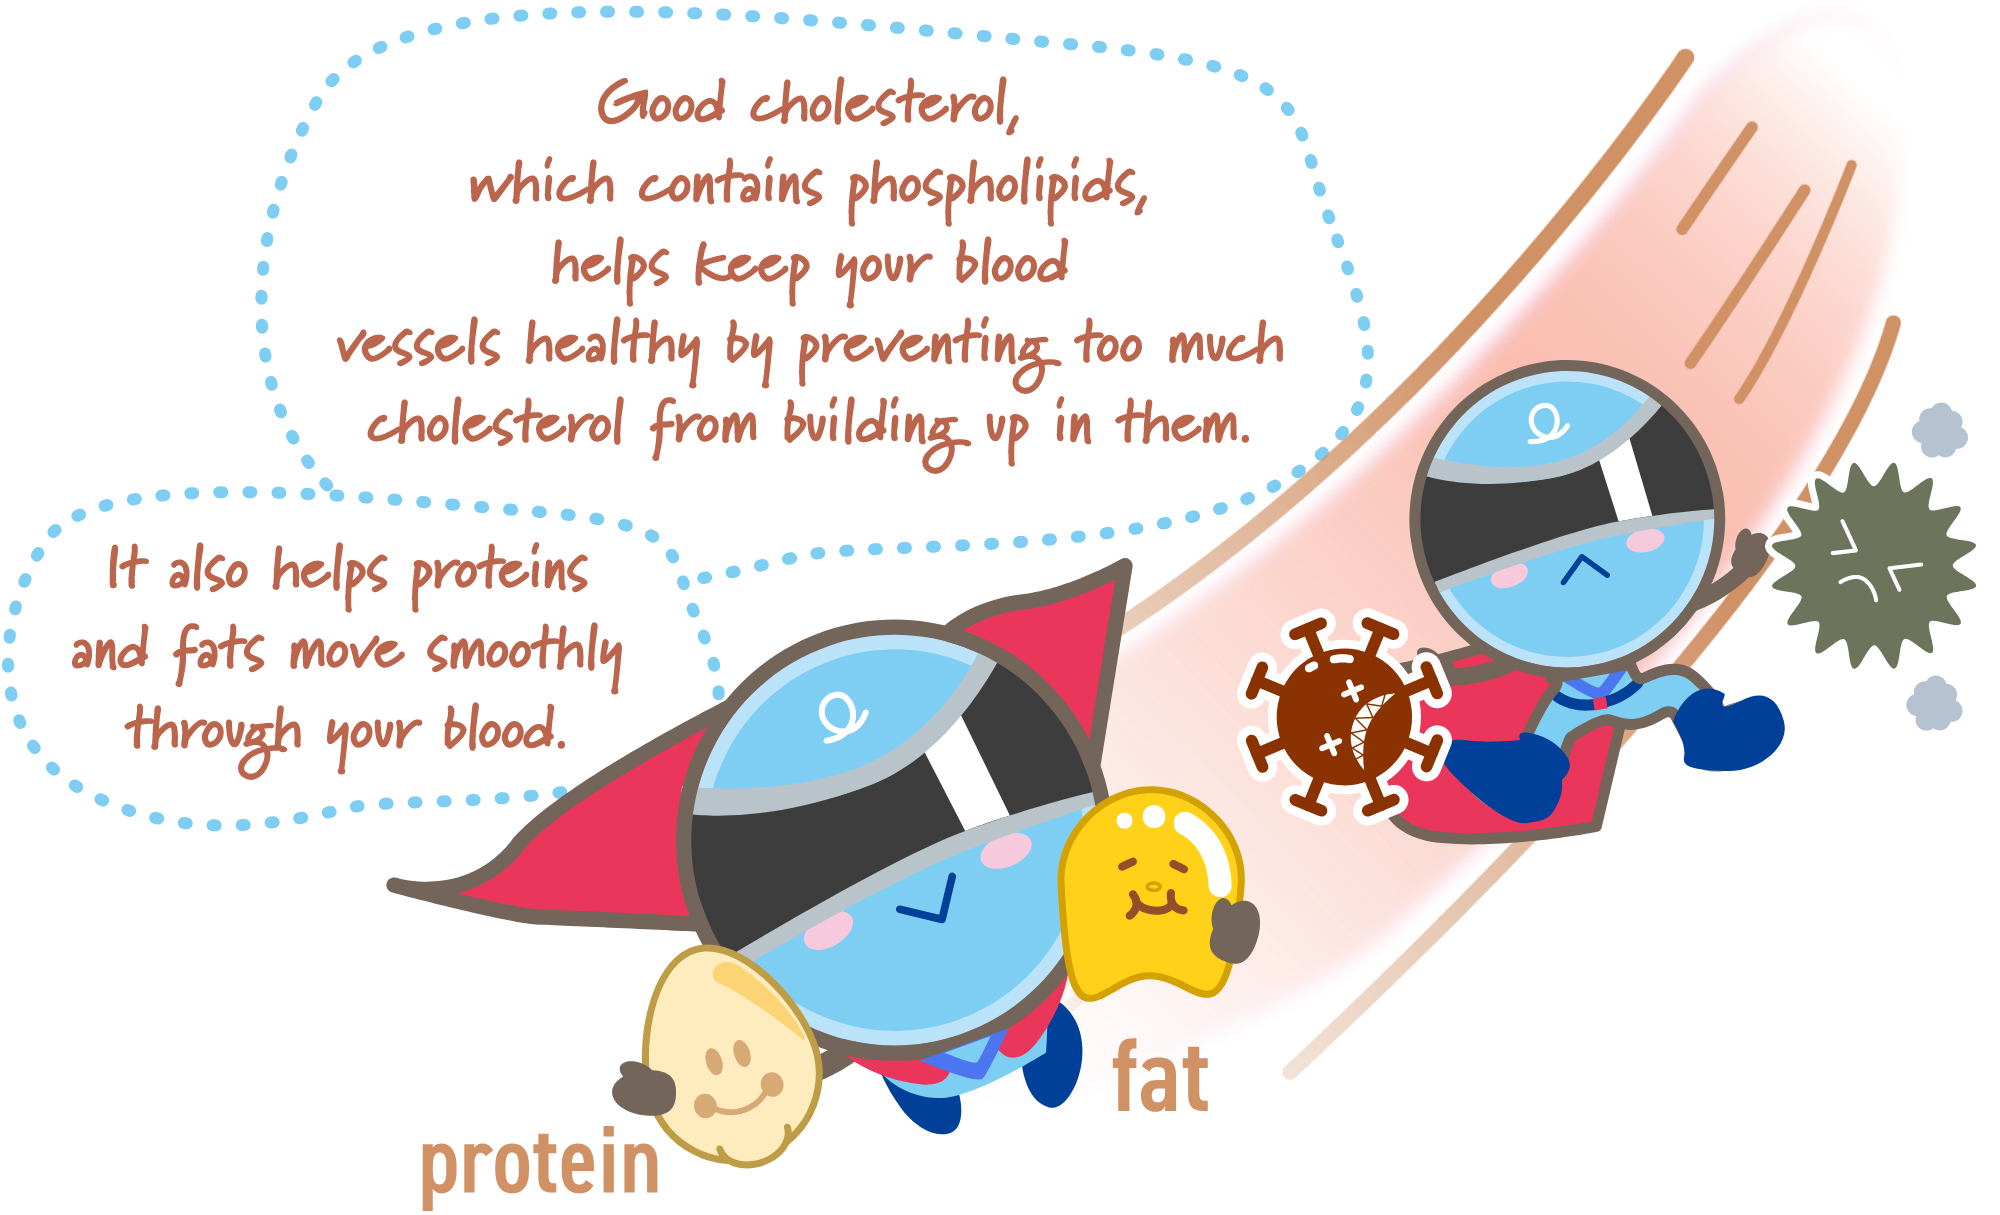 Good cholesterol, which includes phospholipids, helps prevent excess cholesterol from accumulating in the blood vessels and binds proteins and fats together for smooth movement through the bloodstream!